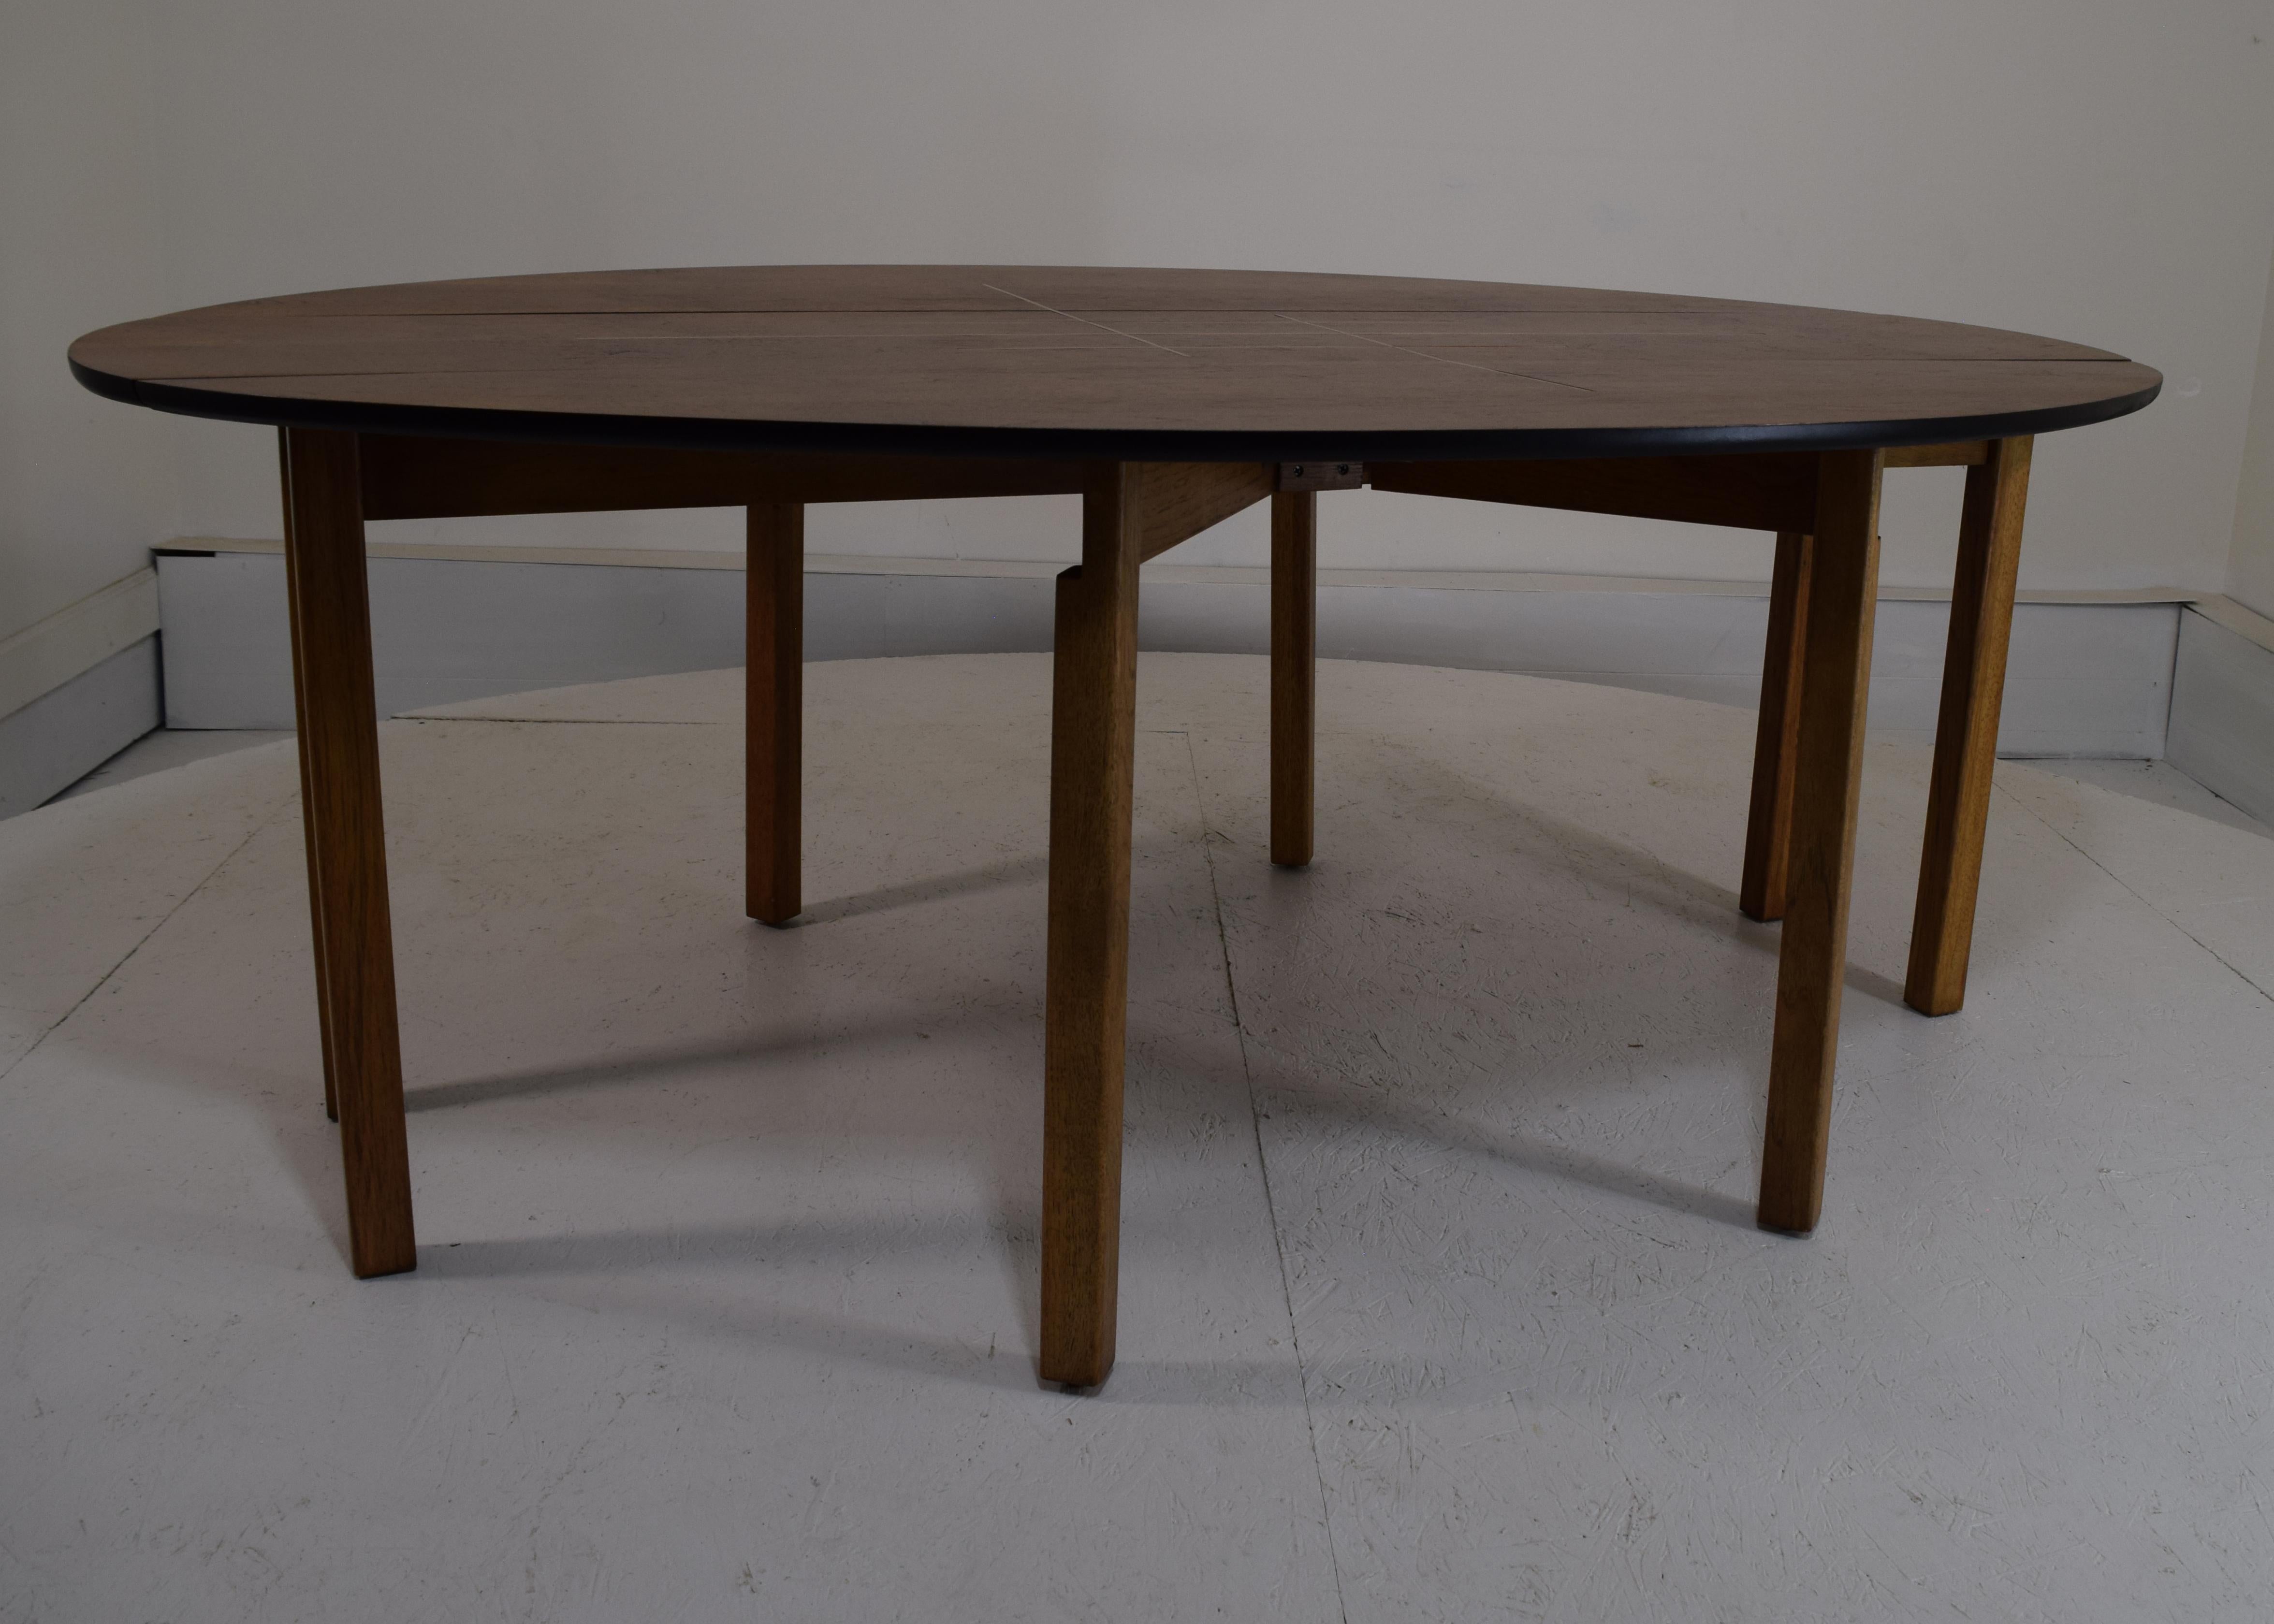 Brass Unique Oval Drop Leaf Dining Table